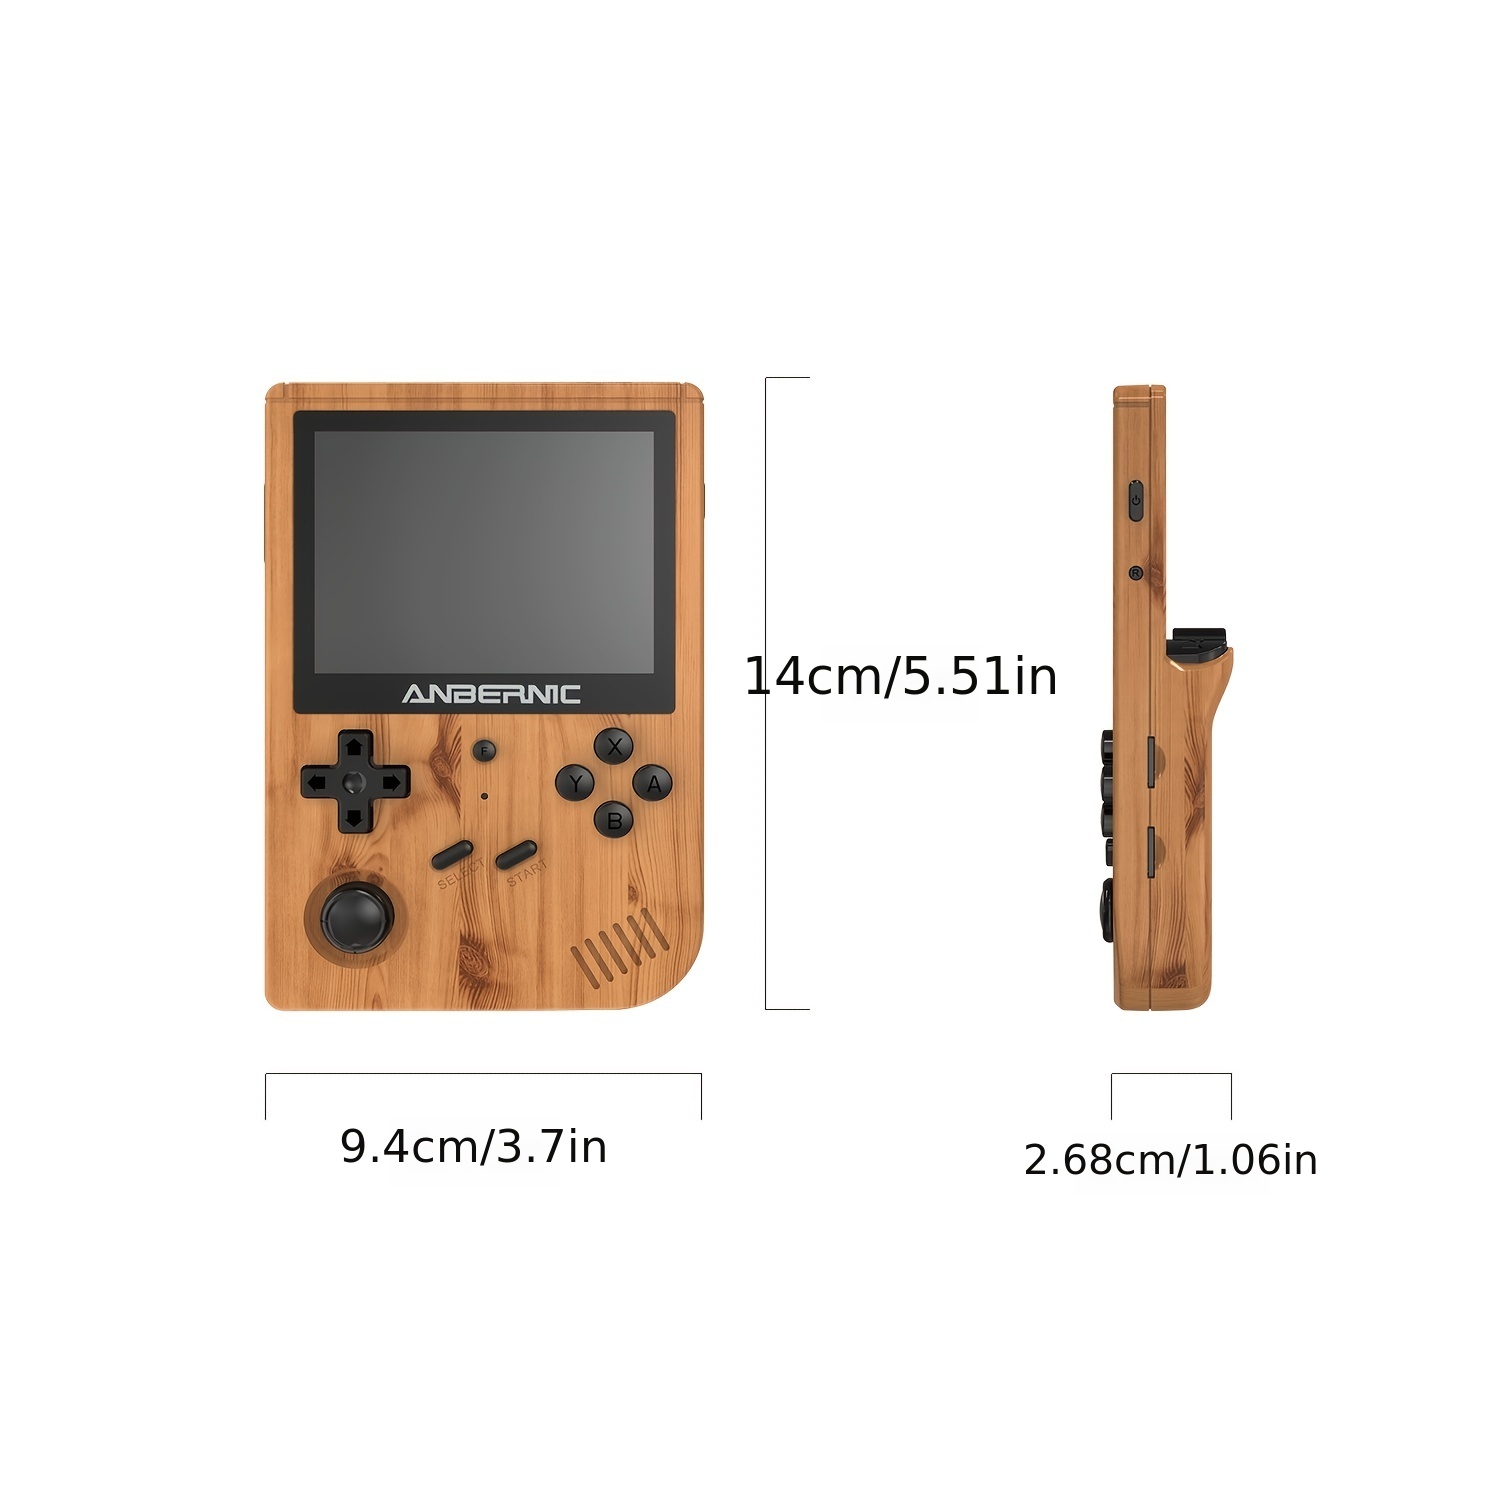  RG351V Handheld Game Console , Open Source System